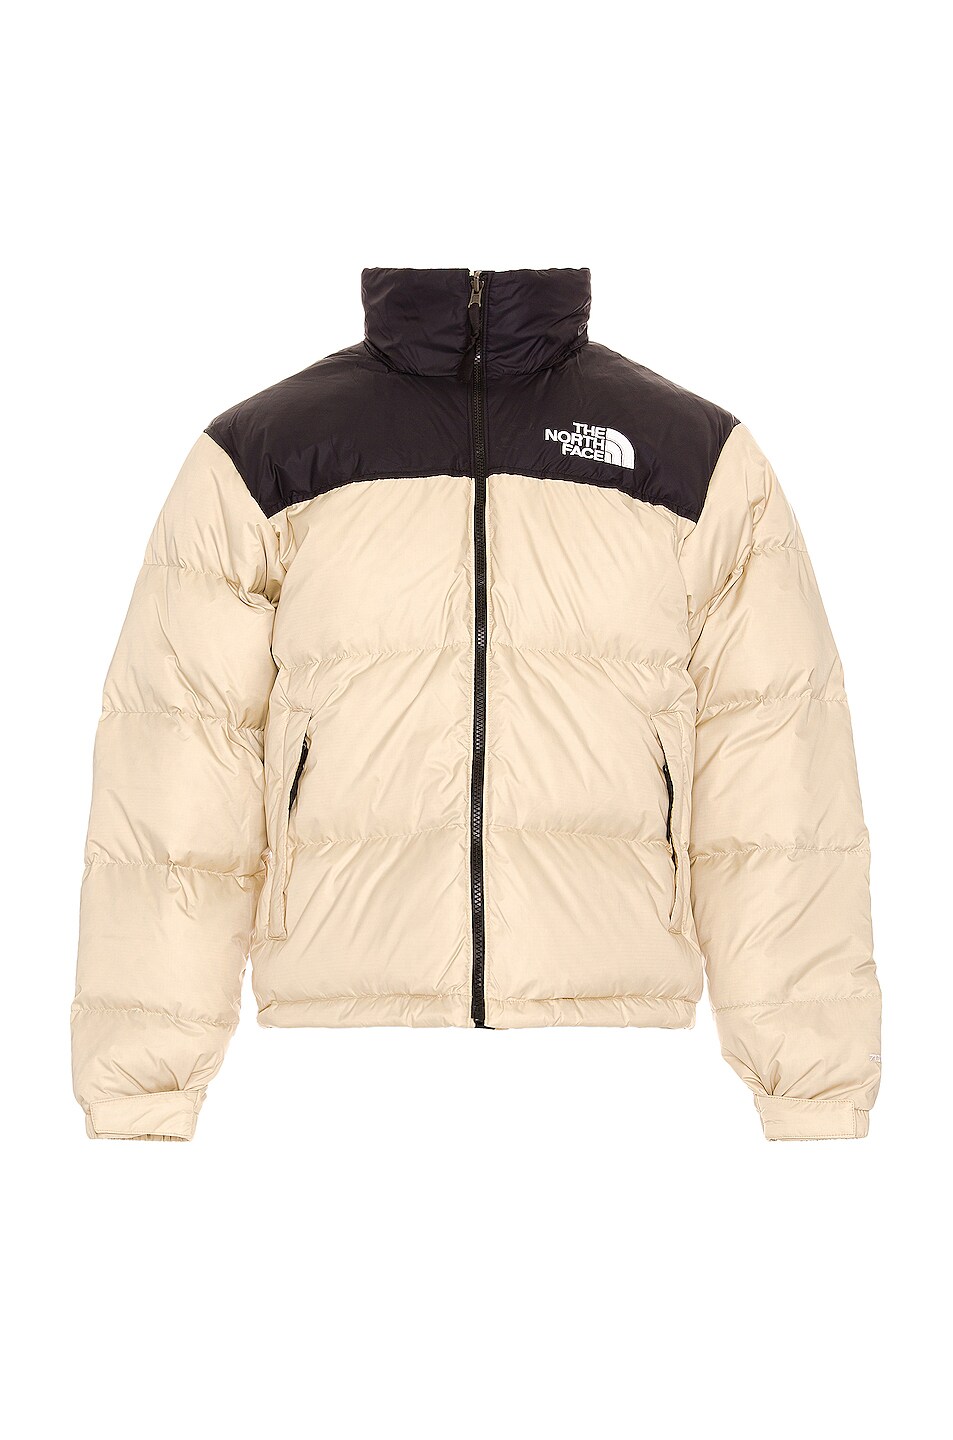 Image 1 of The North Face 1996 Retro Nuptse Jacket in Gravel